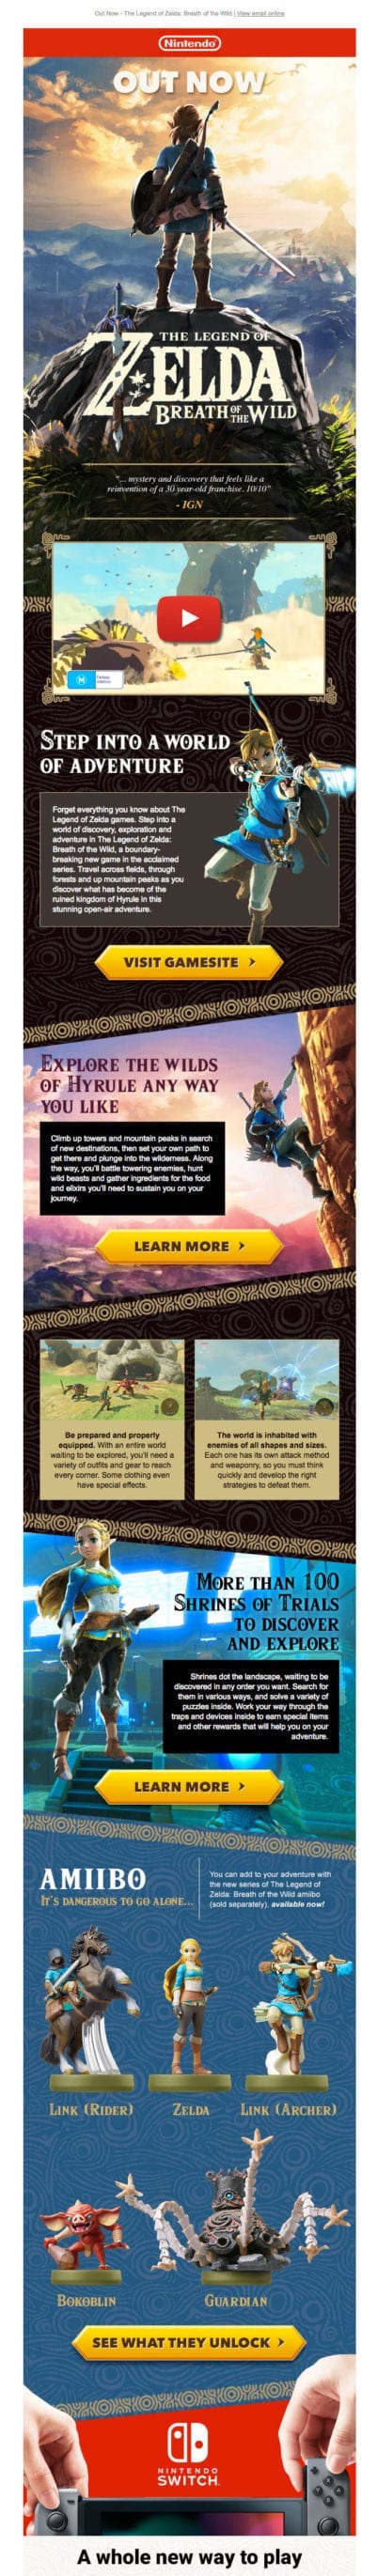 email marketing strategy examples - zelda breath of the wild email